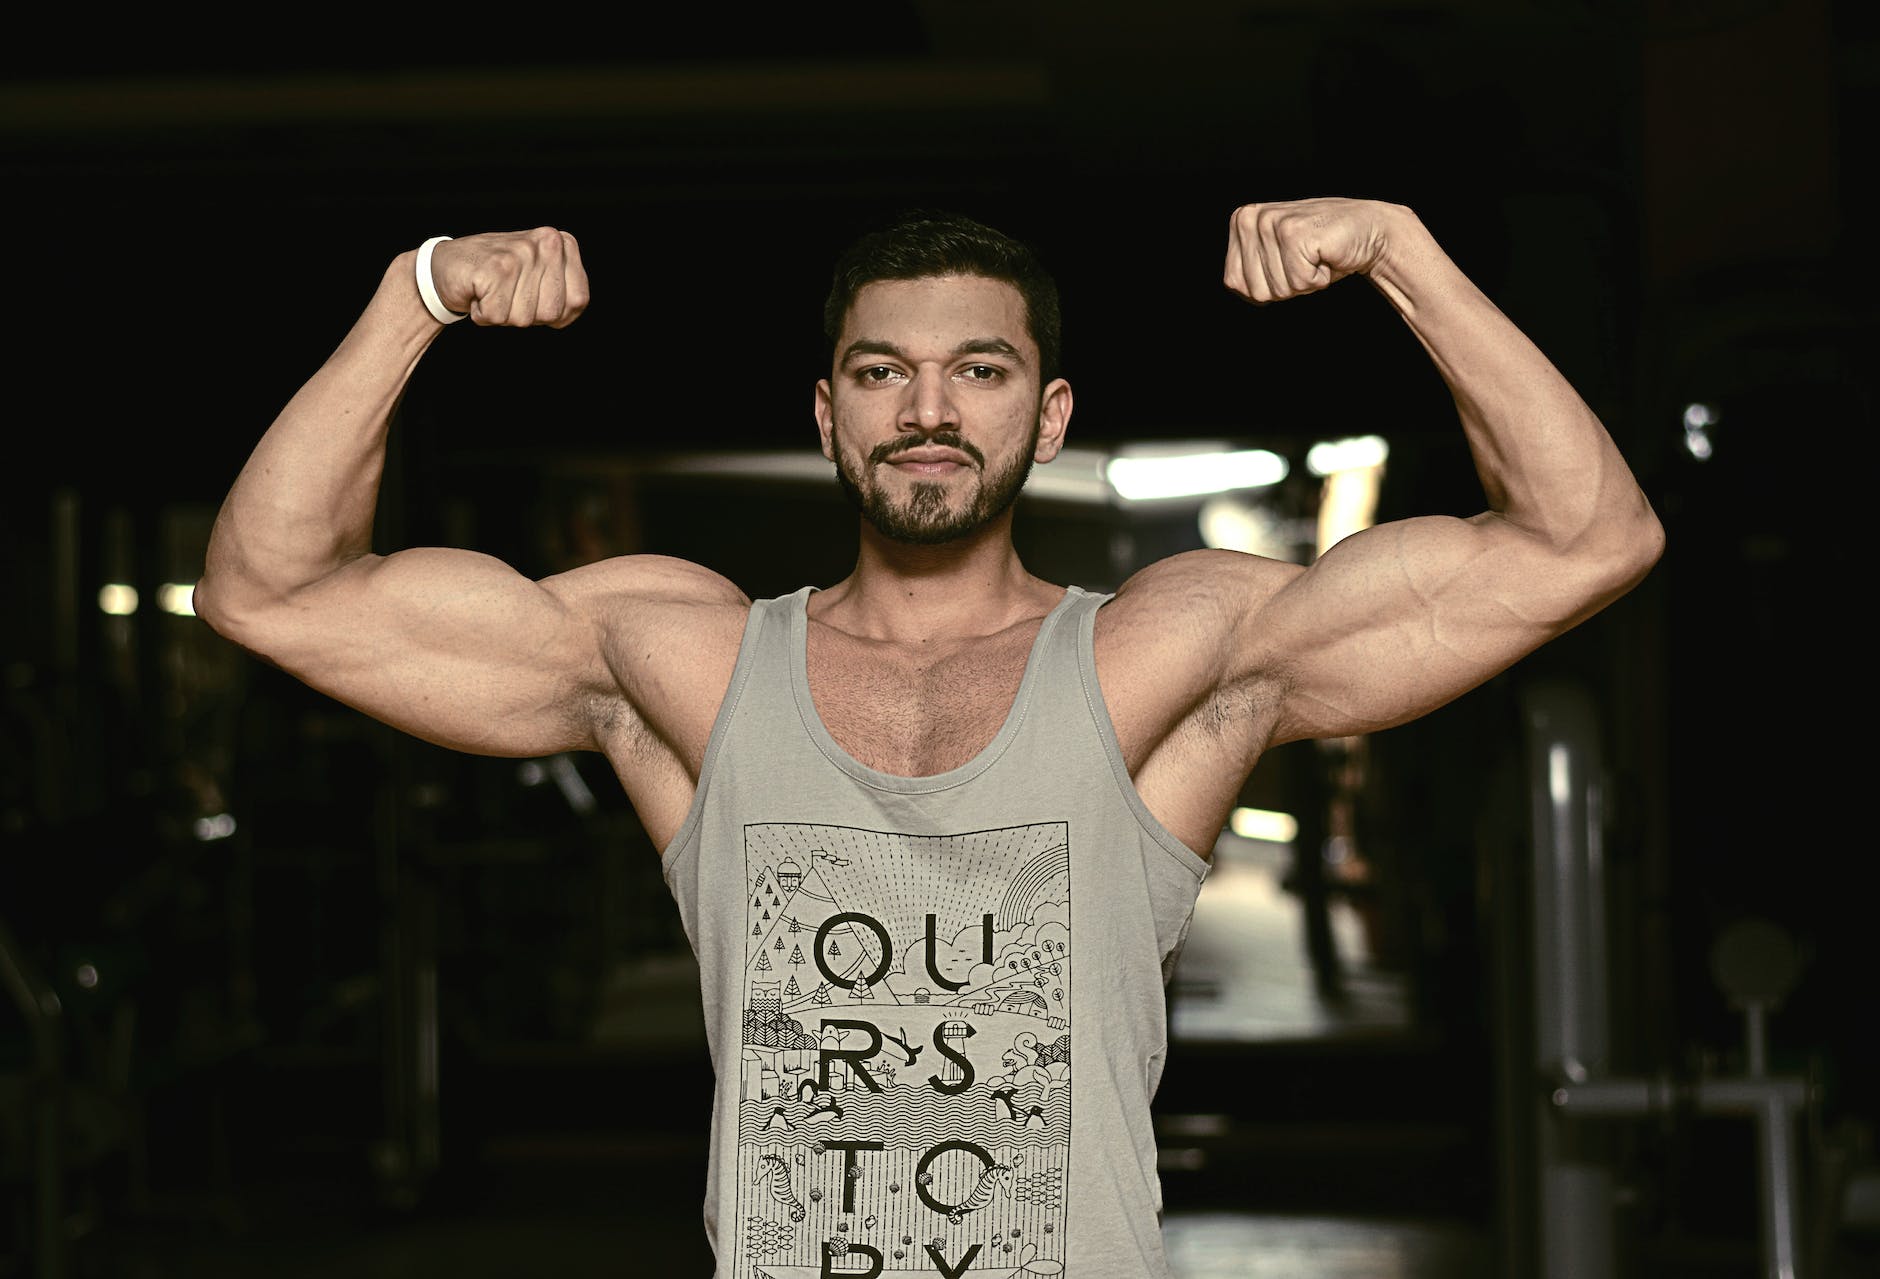 10 Biceps exercises with no equipment